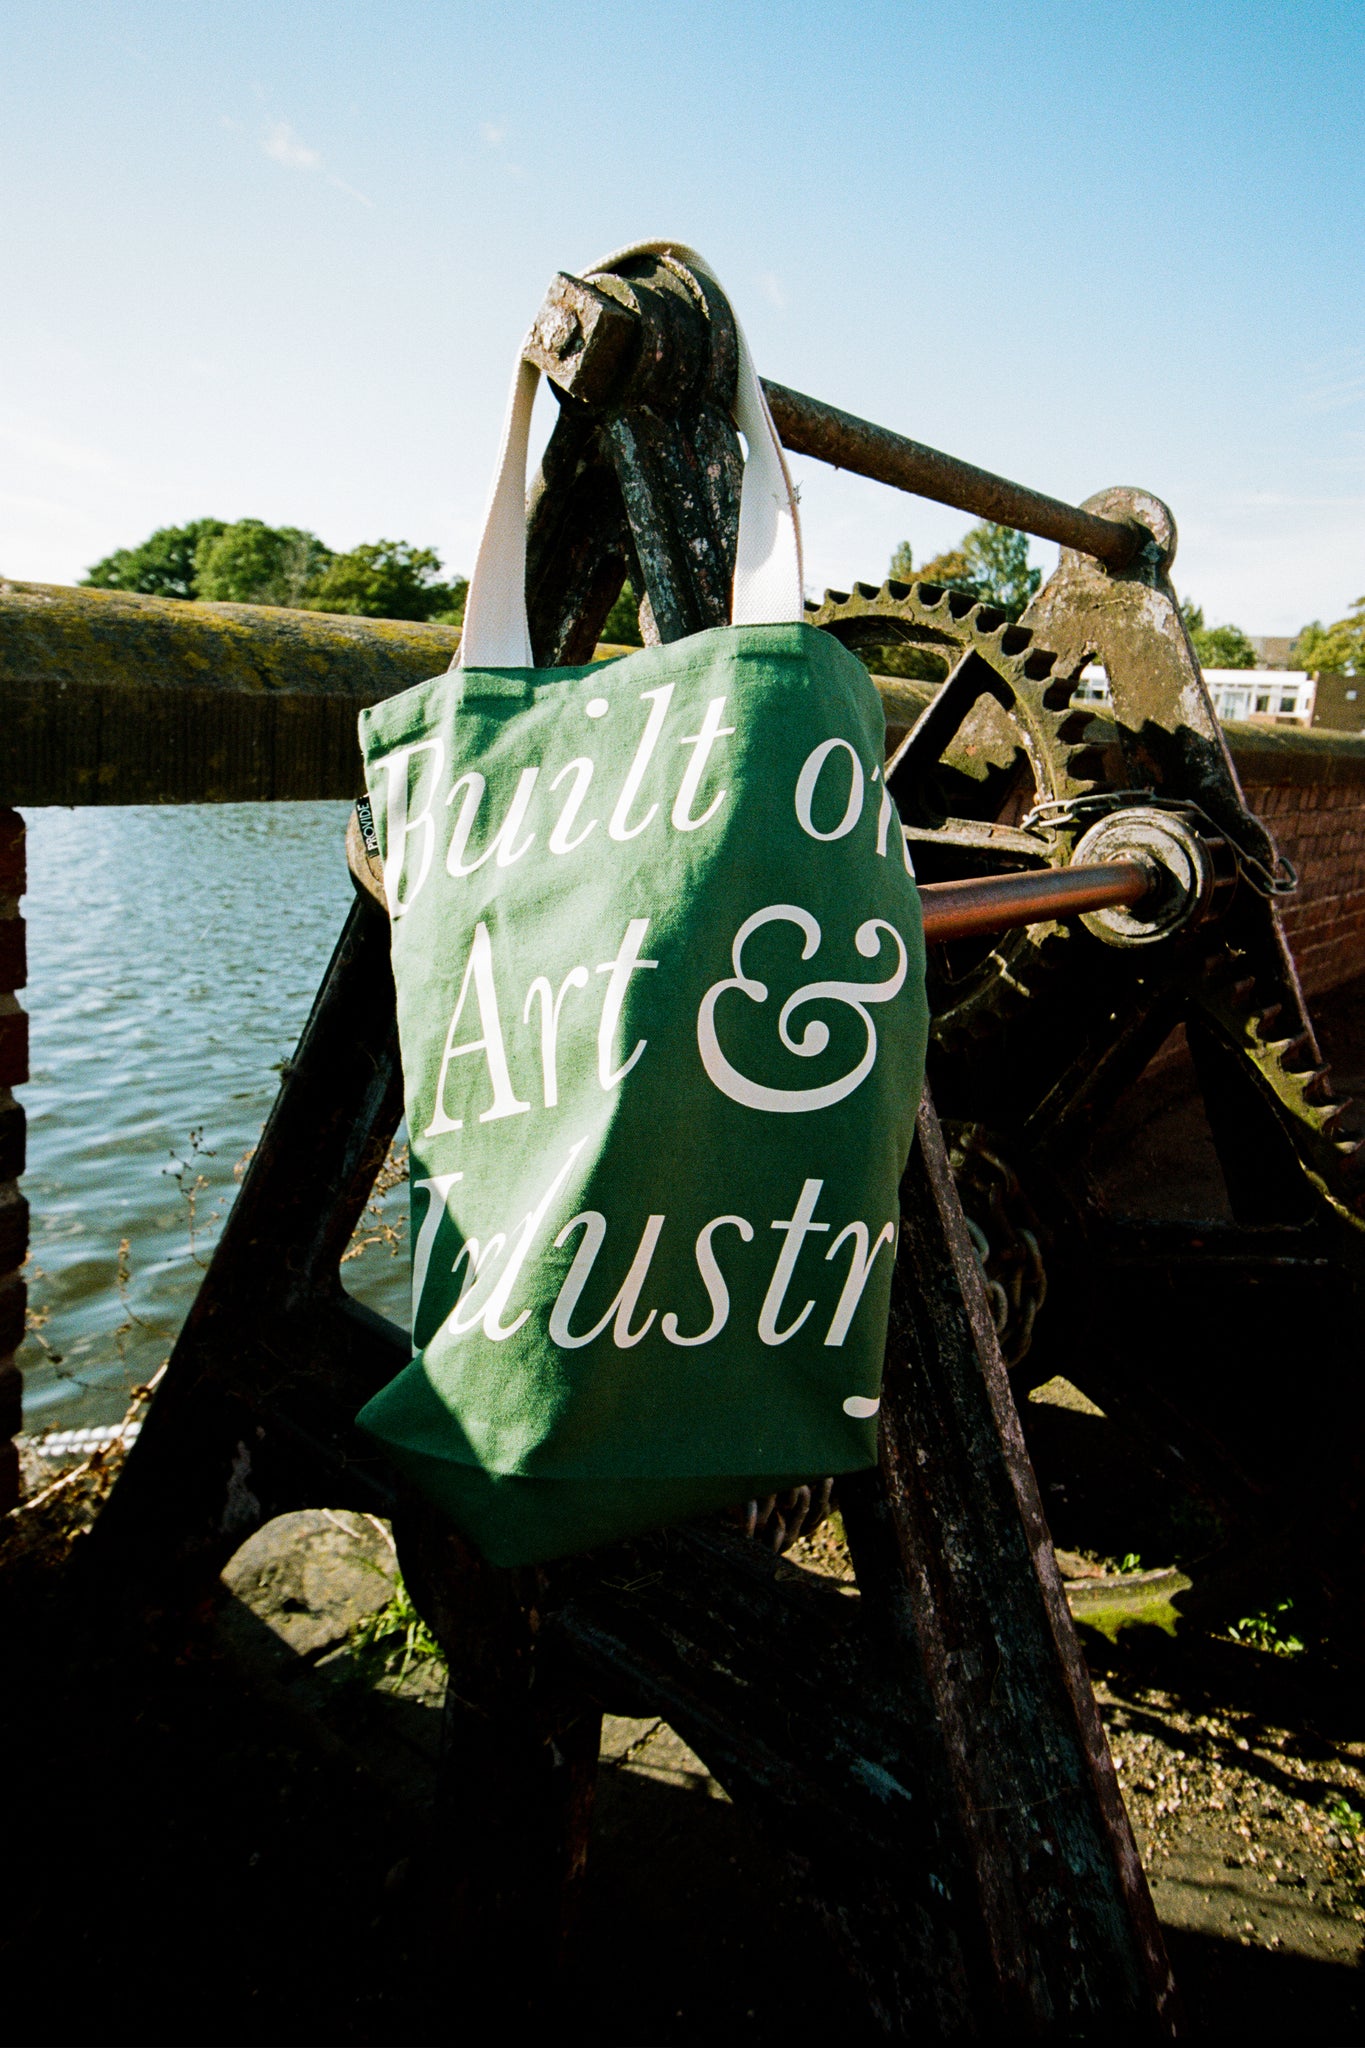 Provide Built on Art and Industry green Tote Bag with hand logo (front)